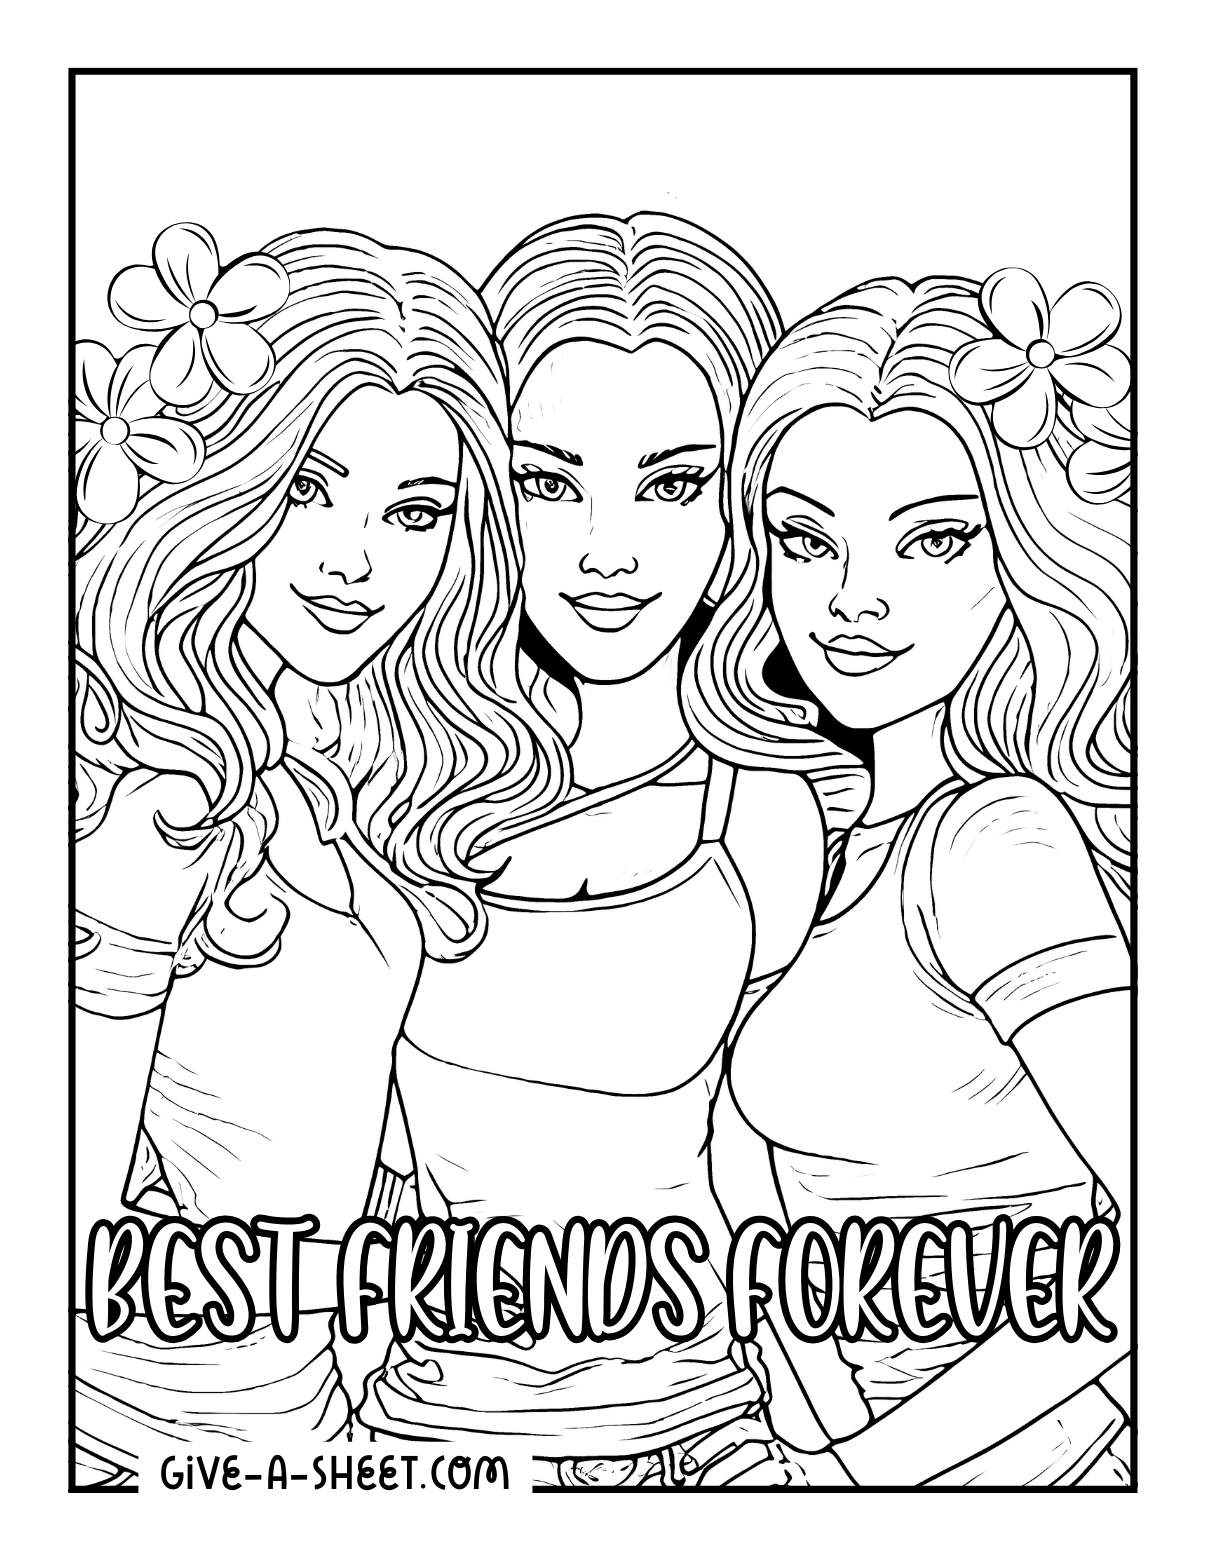 Pretty 3 bff coloring sheet for teenagers.